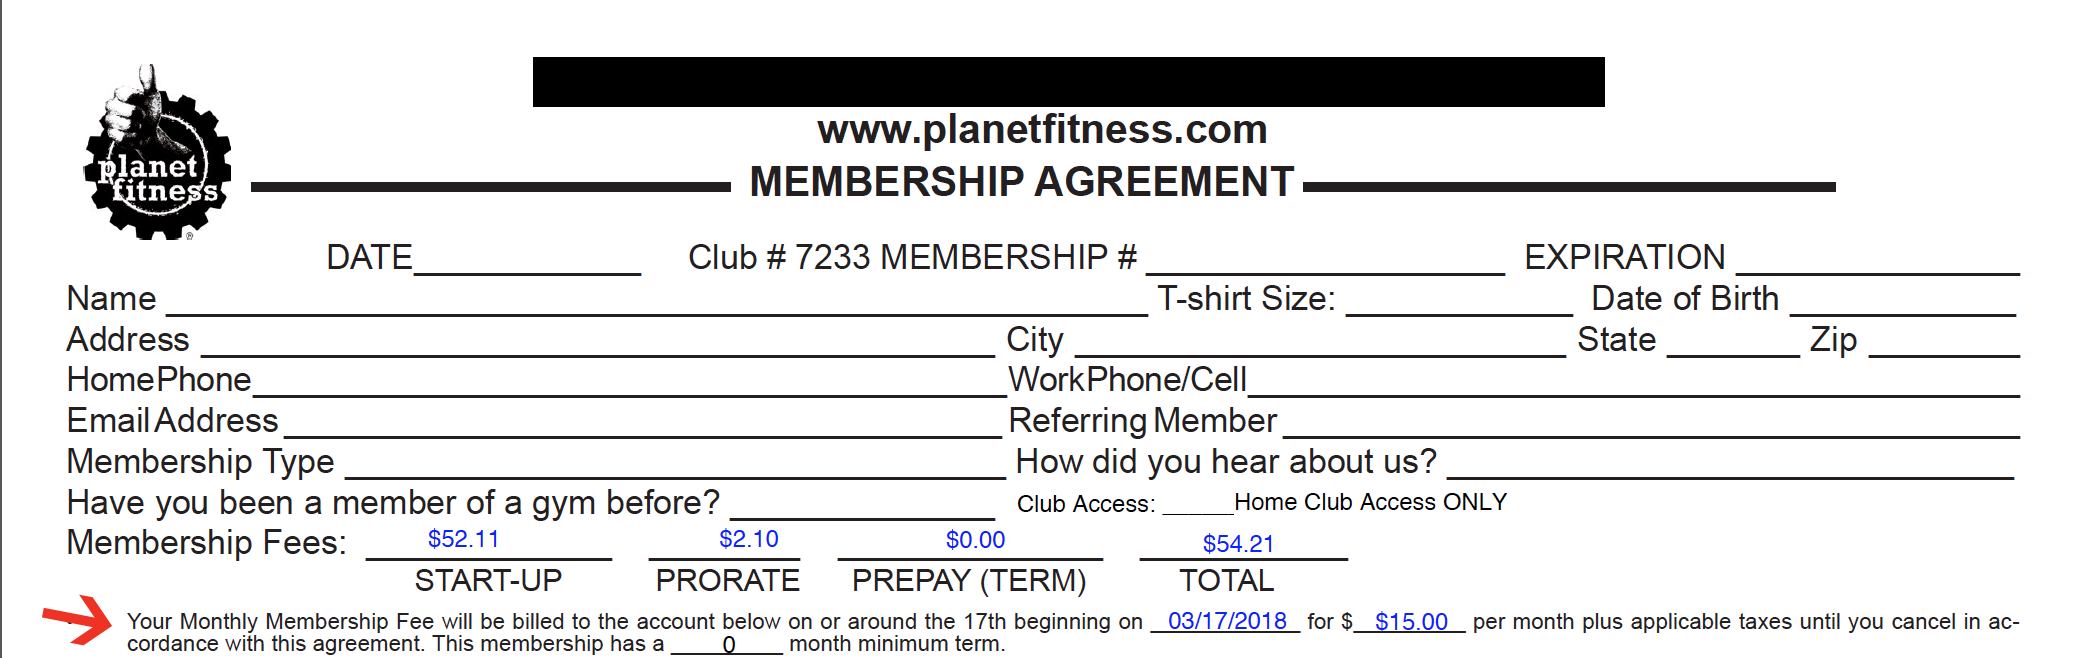 30 Minute Planet Fitness Membership Application Pdf for Weight Loss